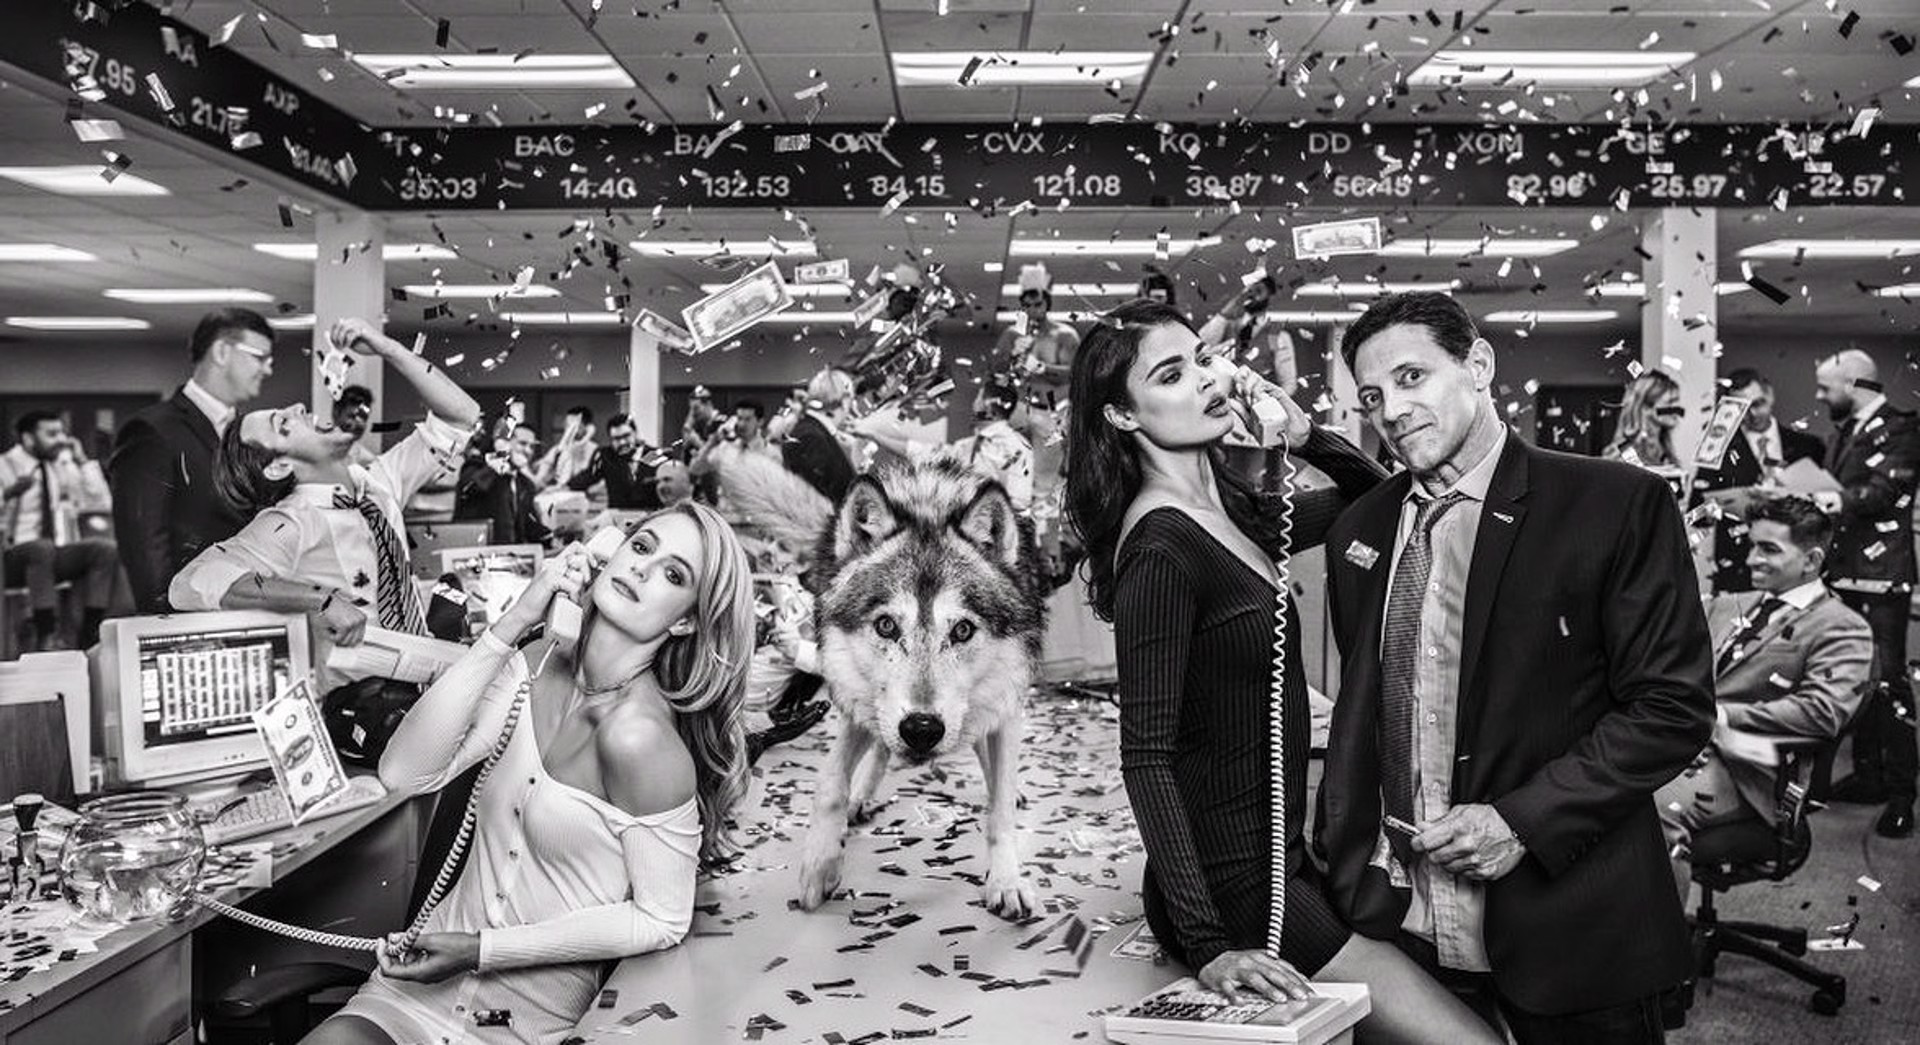 The Wolves of Wall Street by David Yarrow